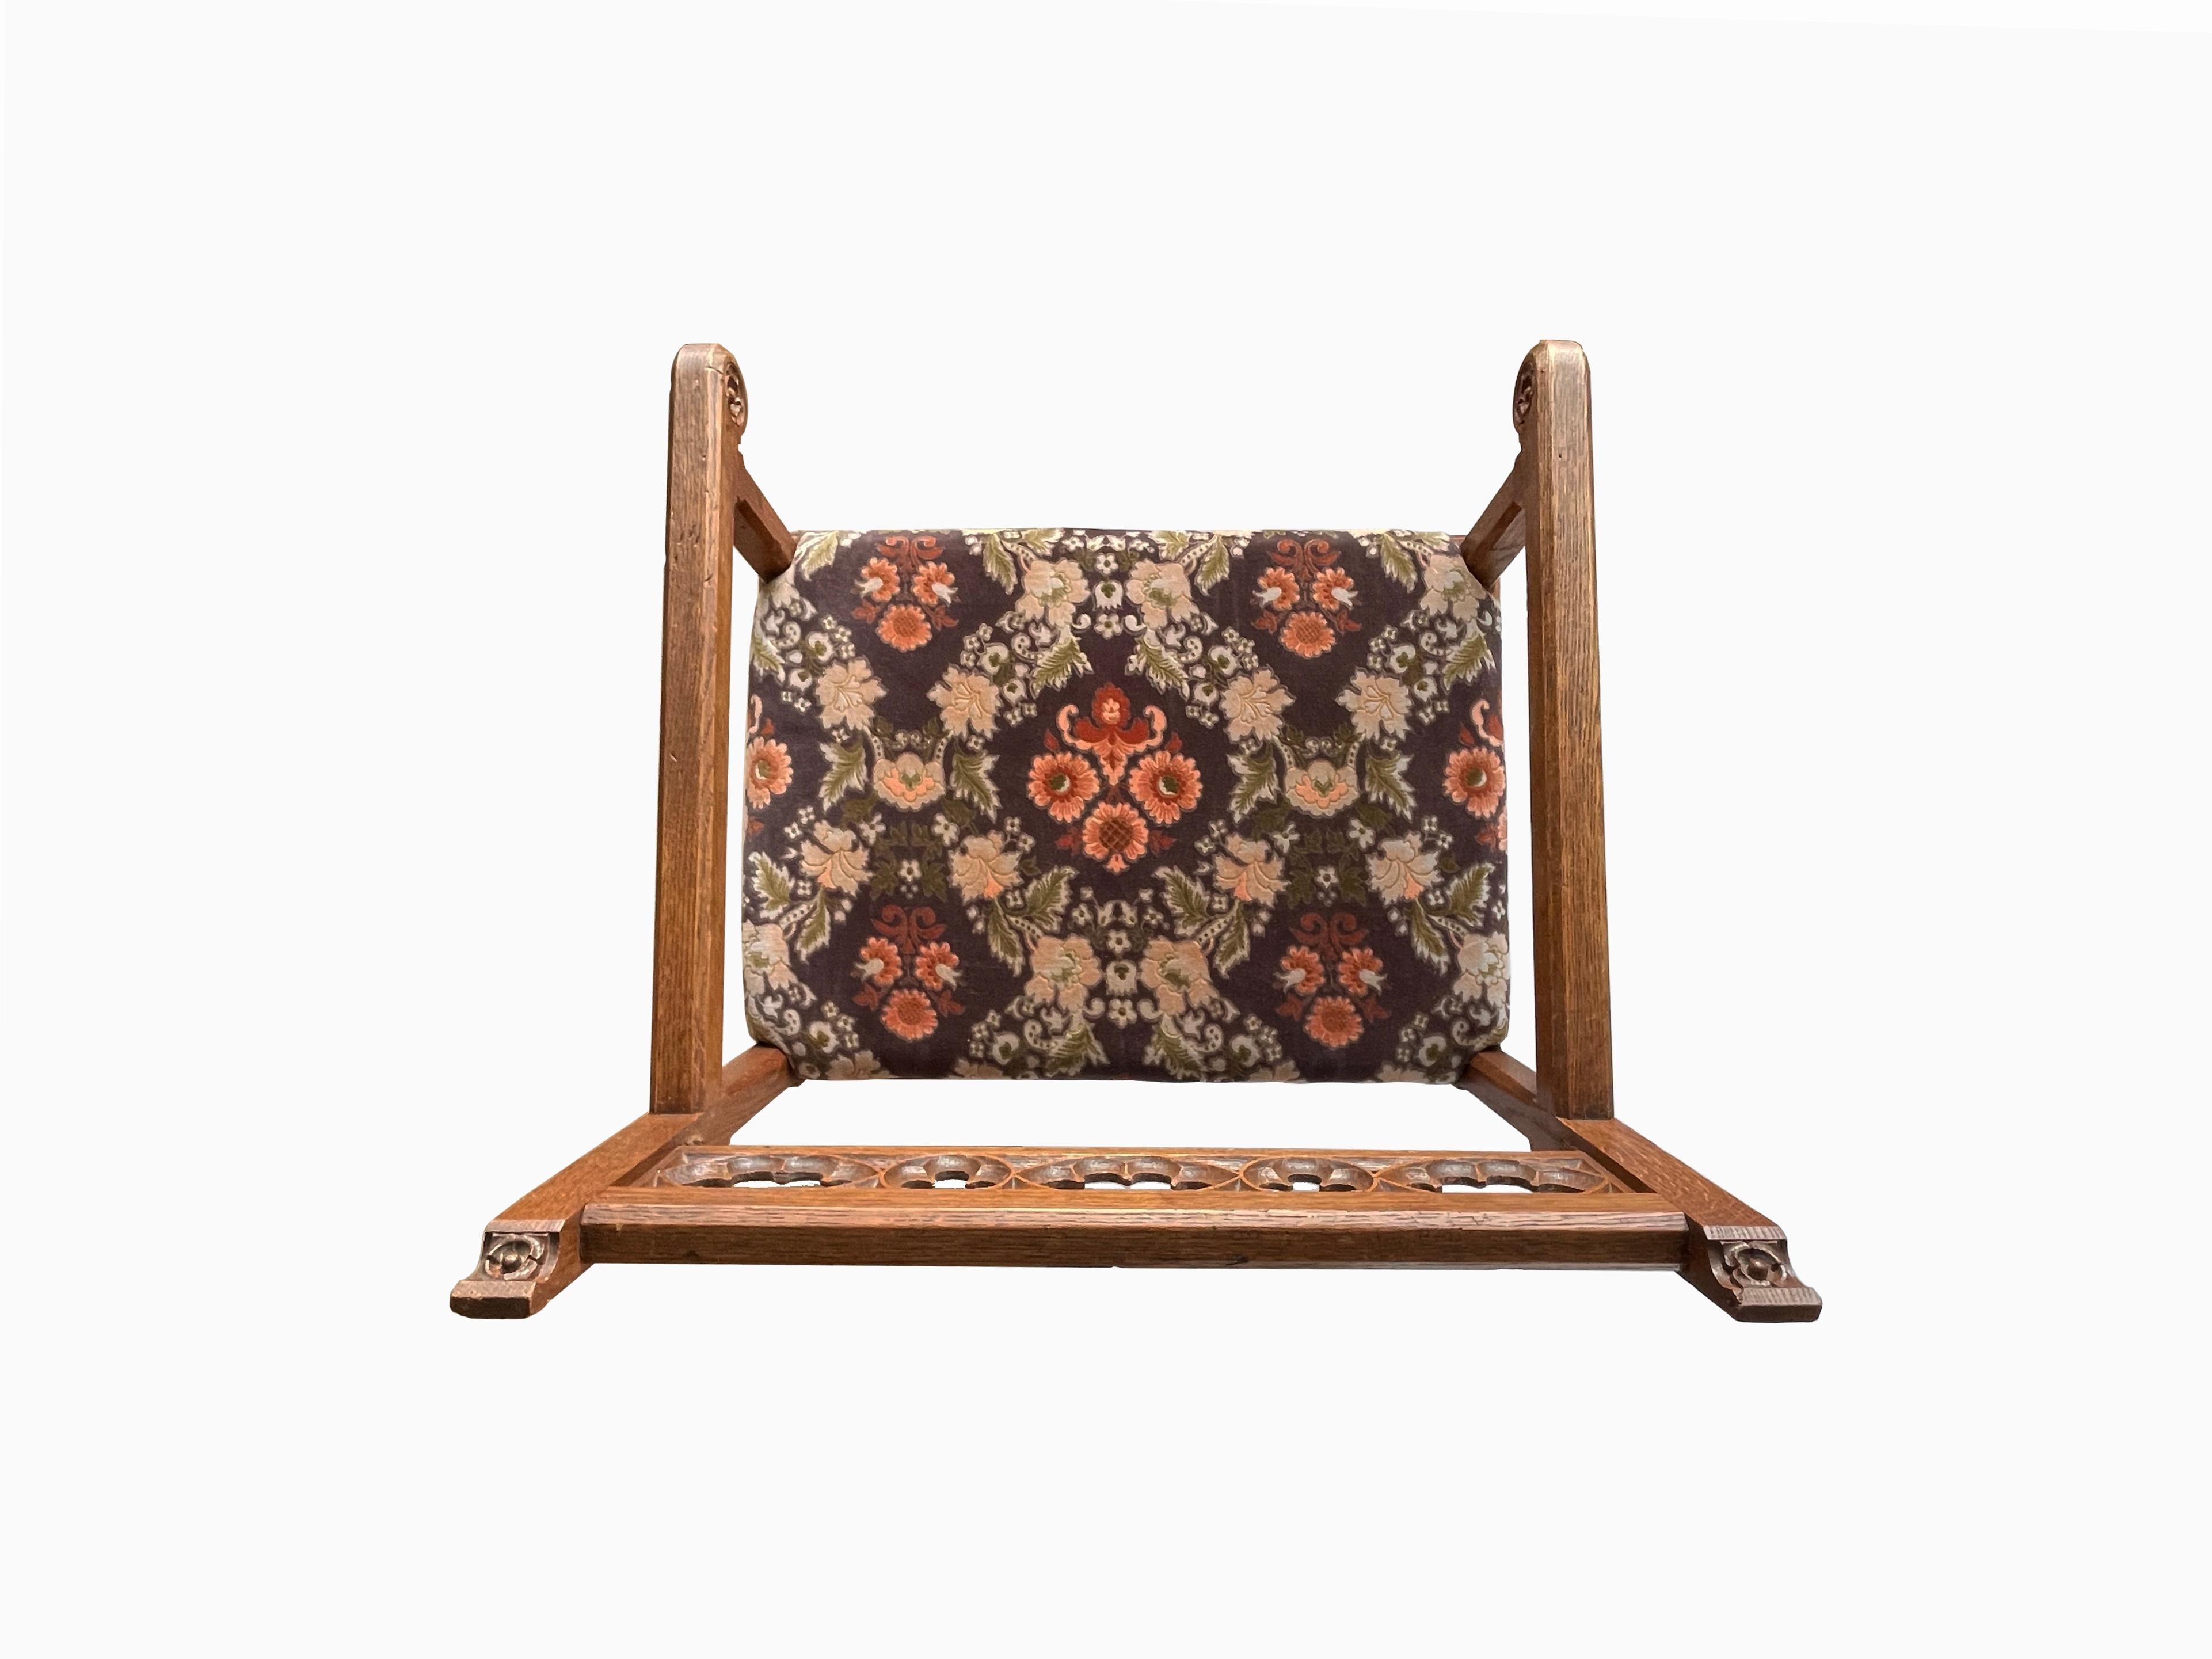 Hand-Woven Antique Gothic Revival Monk Chair Oak and Velvet Upholstered, ca. 1900, Europe For Sale